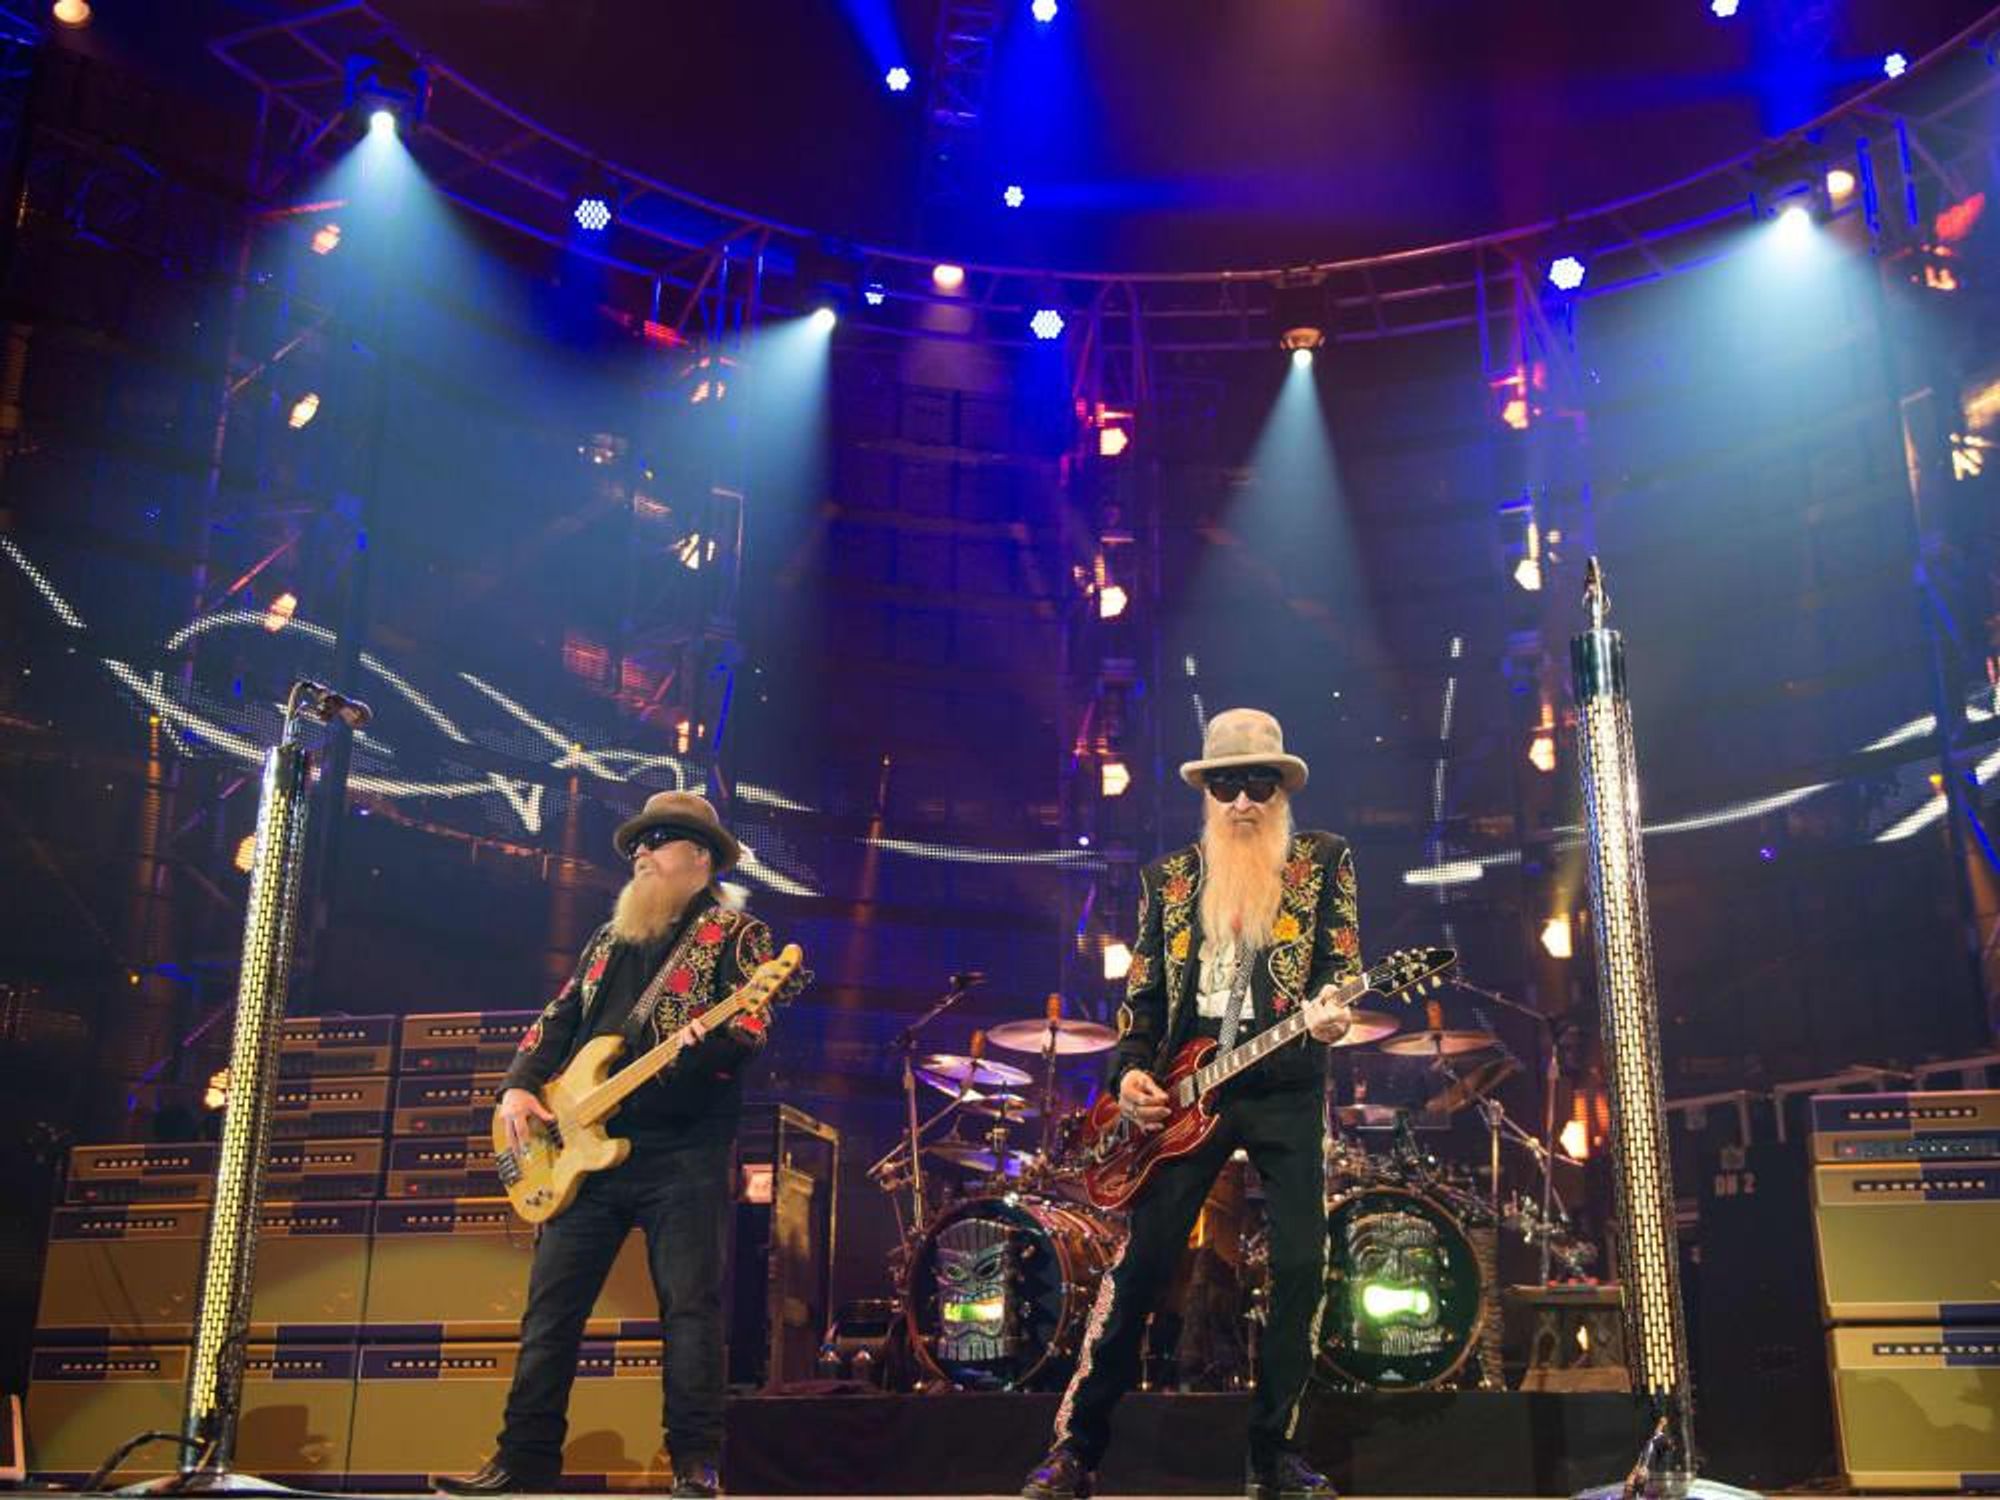 ZZ Top at Houston Rodeo